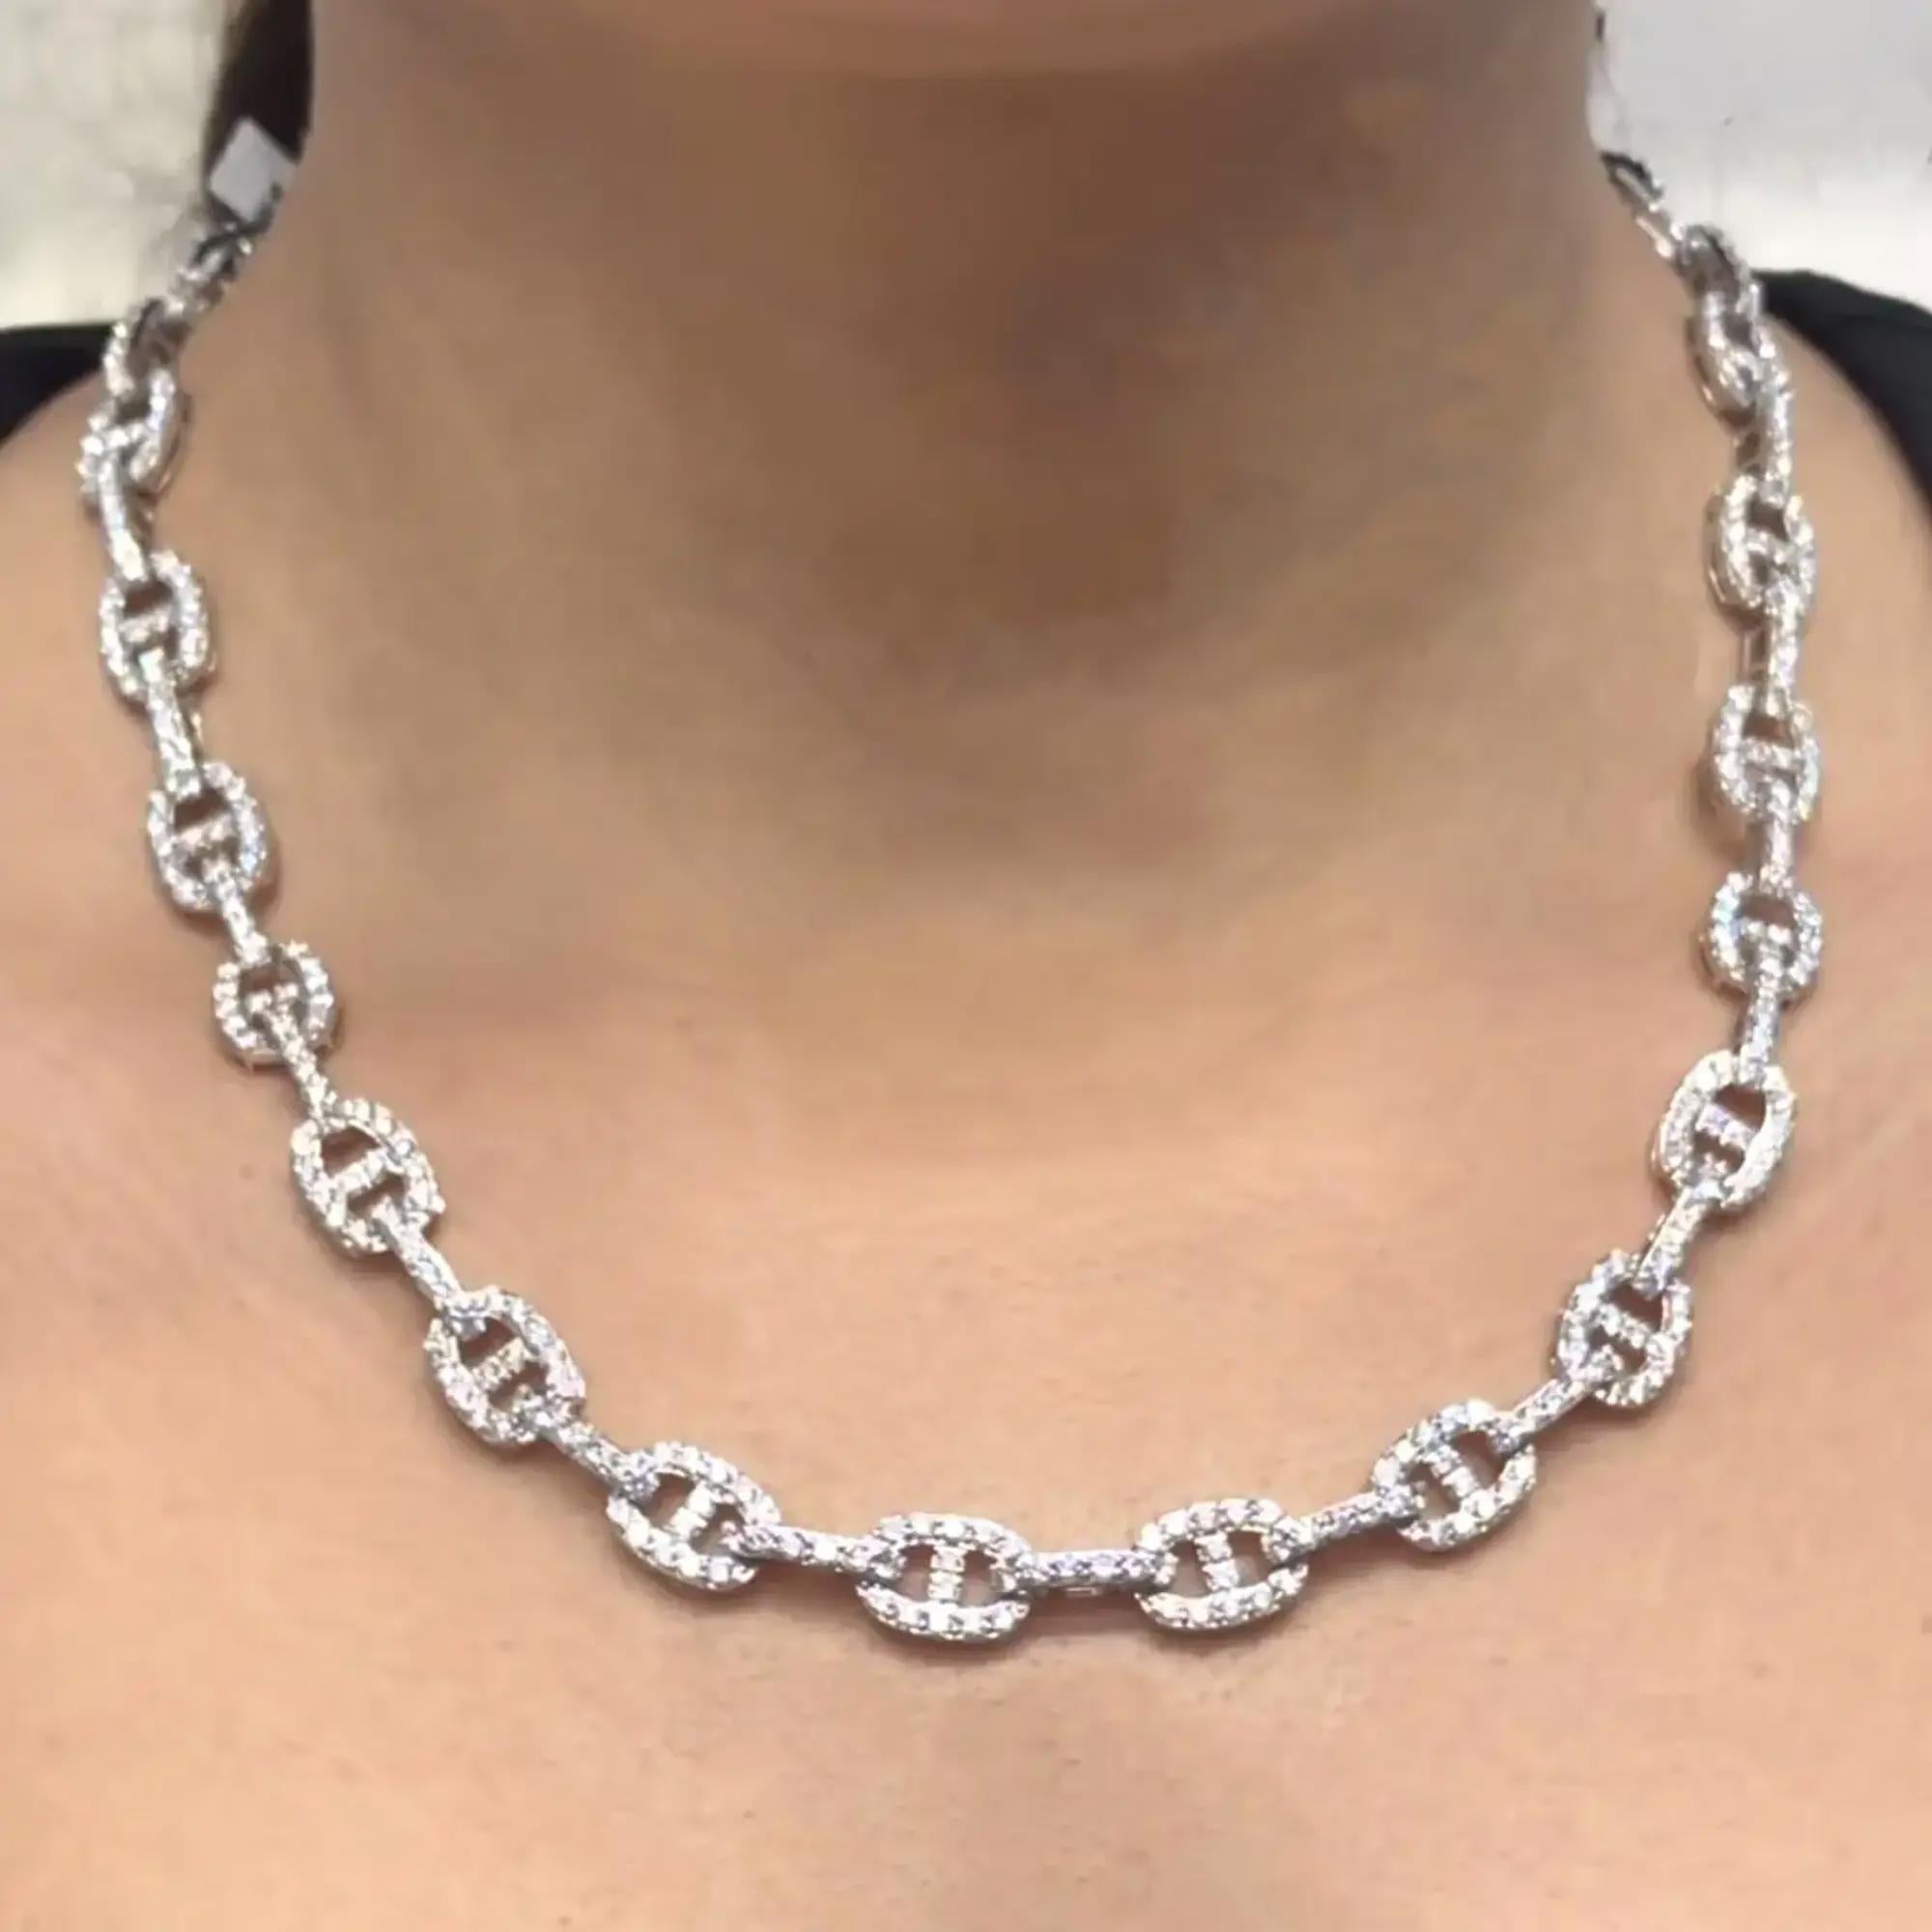 Round Cut Diamond Link Chain Necklace 18K White Gold 14.96Cttw 17.5 Inches For Sale 1